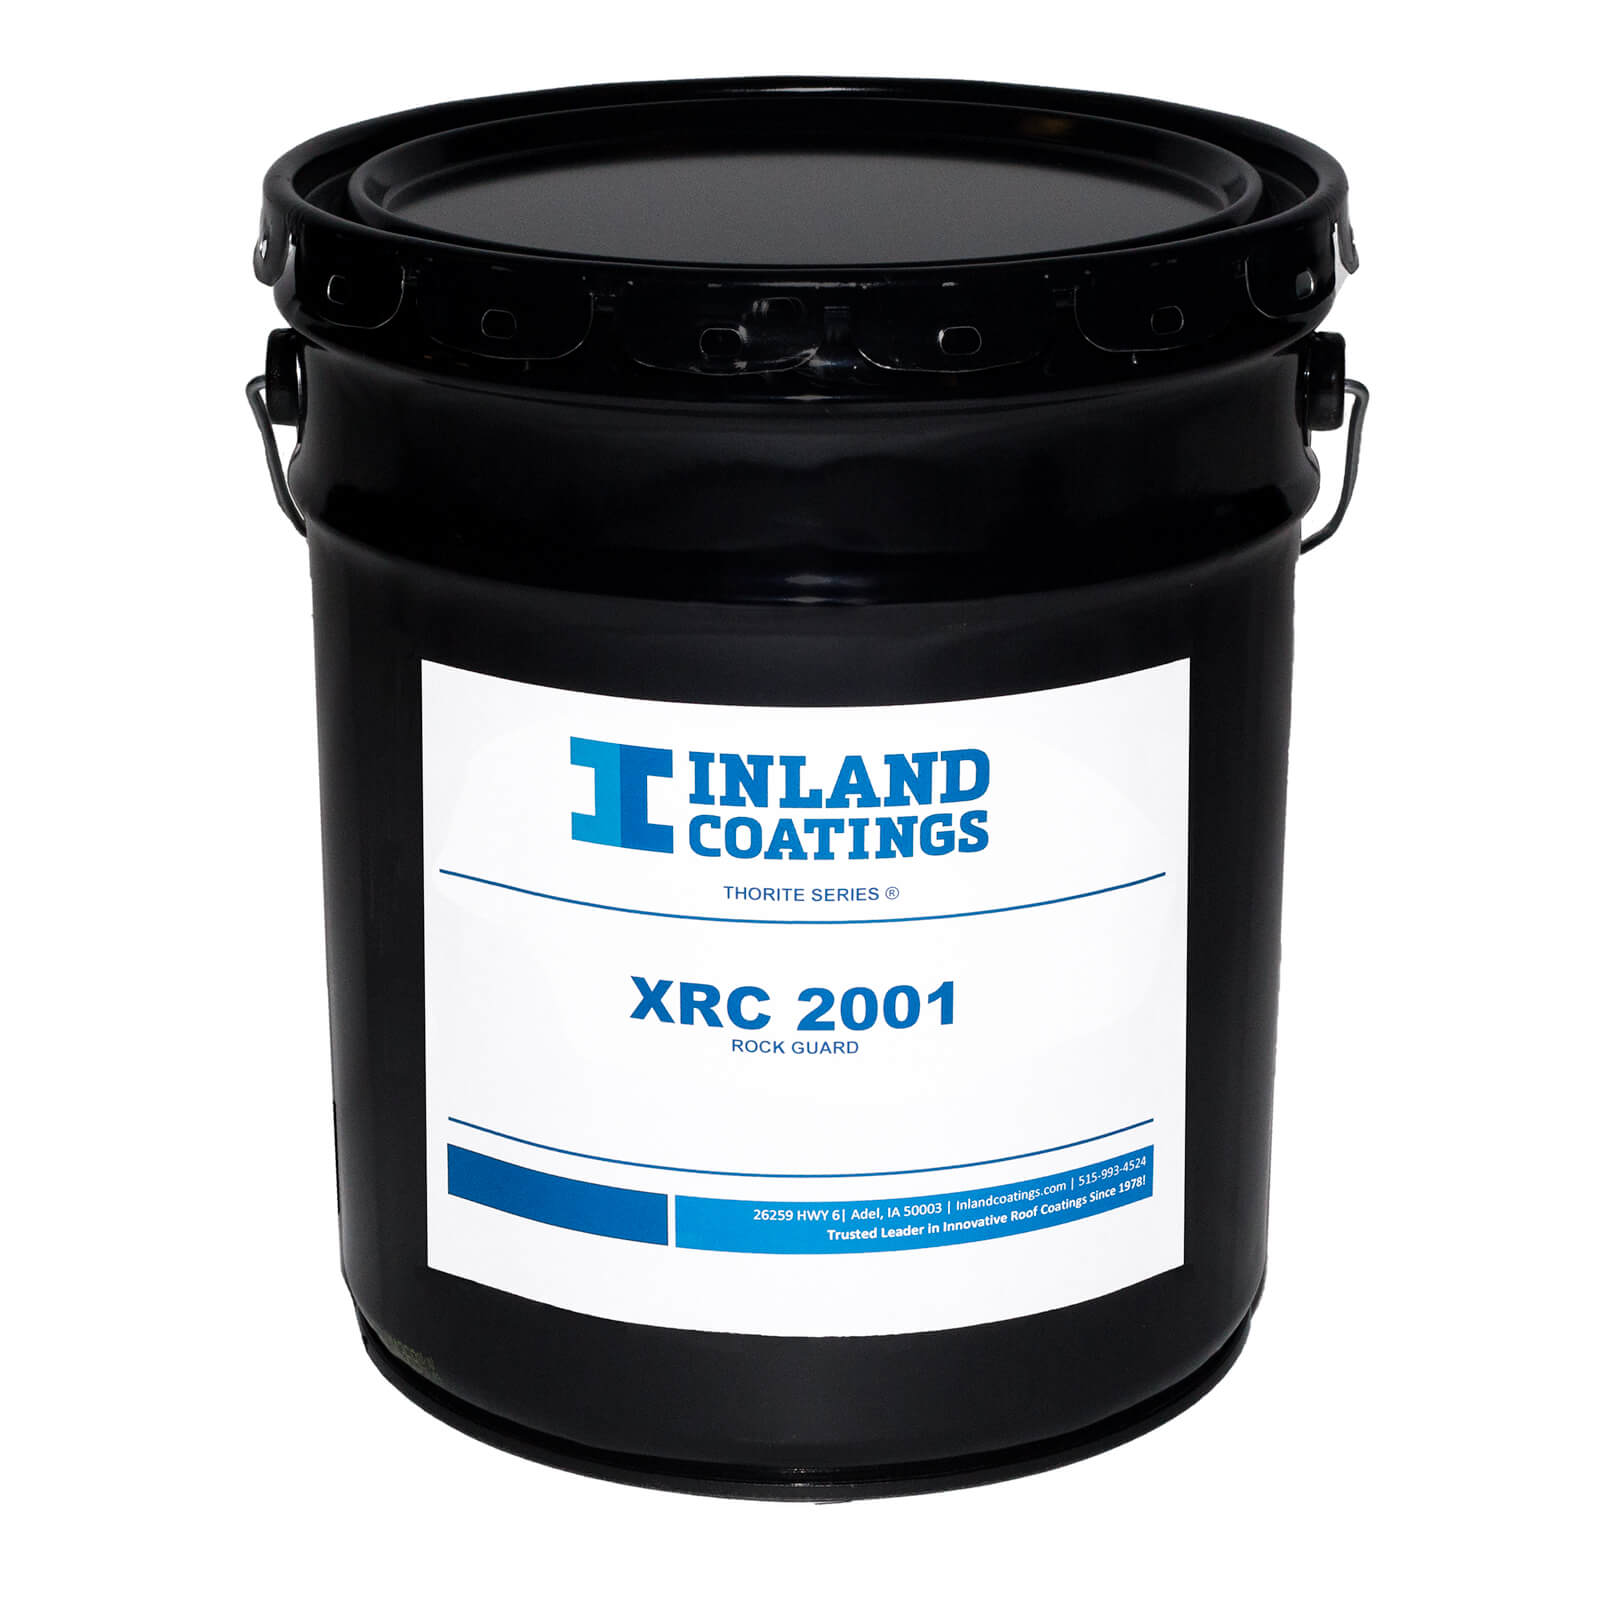 A bucket of Inland's XRC-2001 Thorite Series Rock Guard